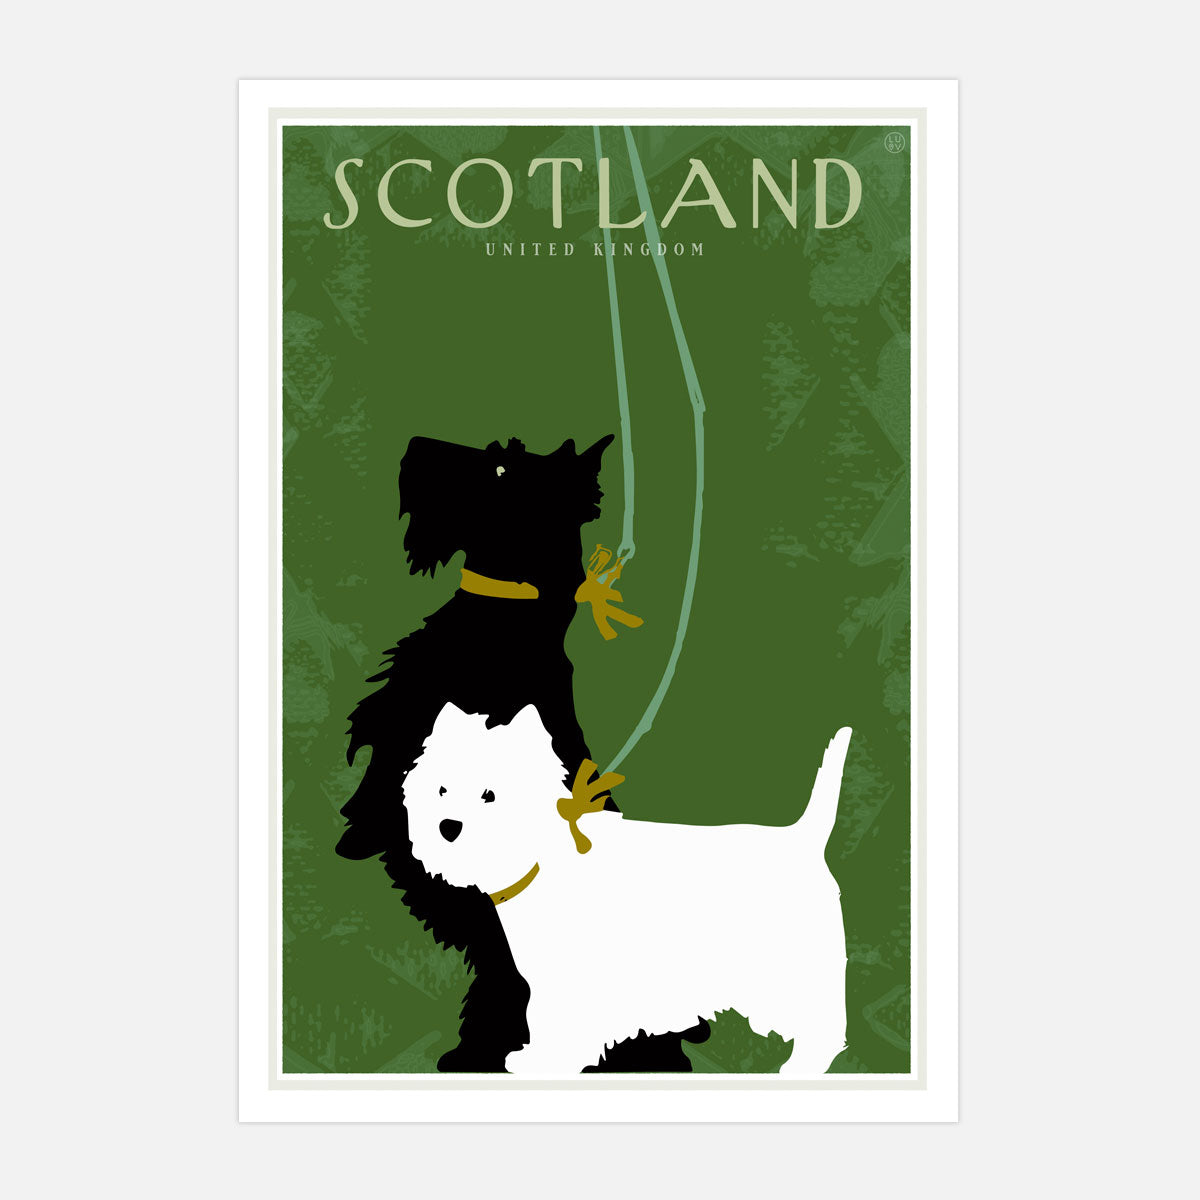 Scotland retro vintage travel poster from Places We Luv